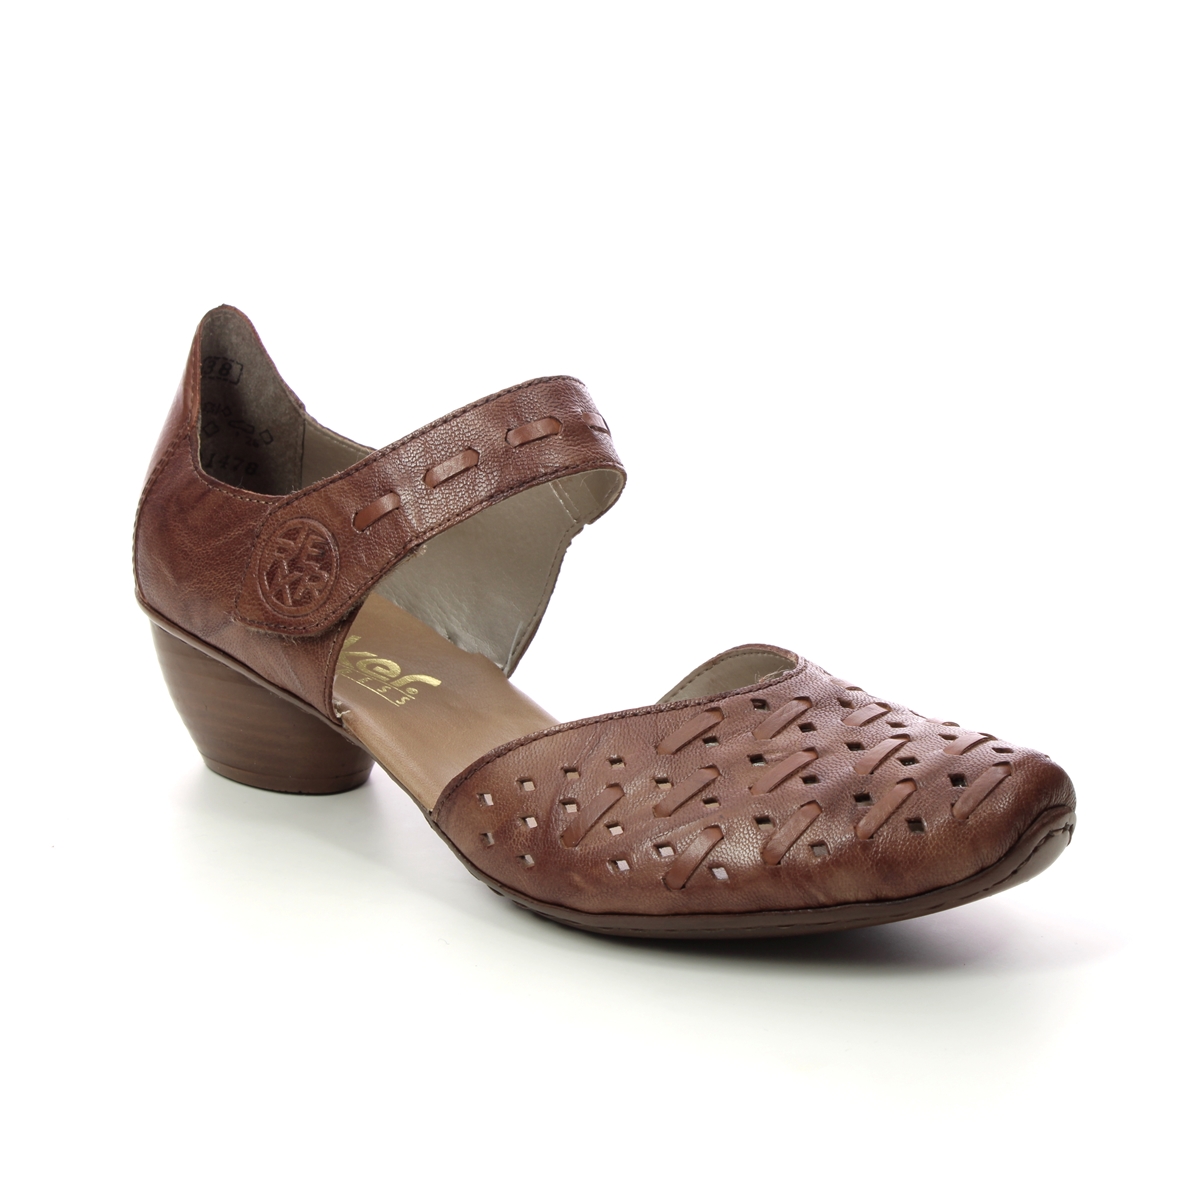 Rieker 43770-22 Tan Leather Womens Comfort Slip On Shoes in a Plain Leather in Size 40